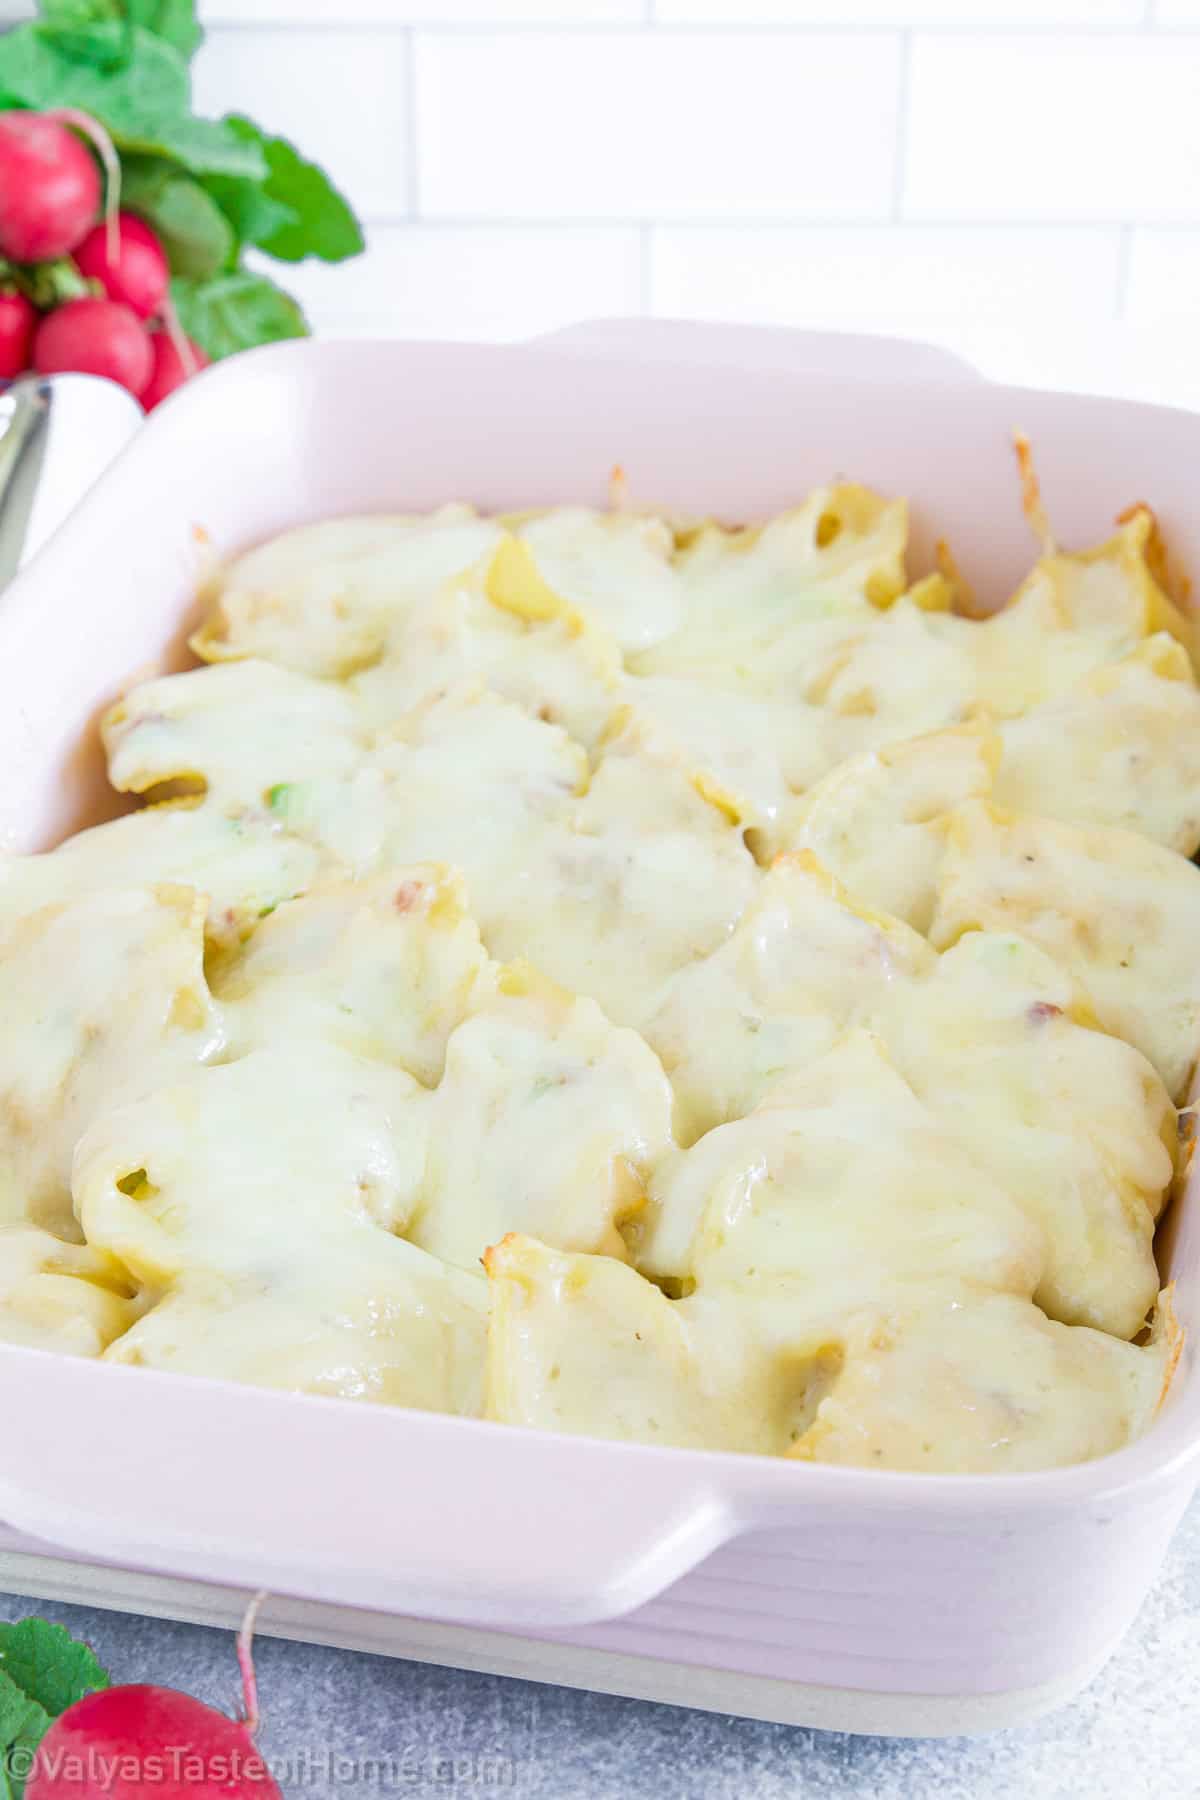 This chicken alfredo stuffed shells recipe features jumbo pasta shells and creamy, homemade alfredo sauce. It's an easy weeknight meal that can be prepped a day ahead! 